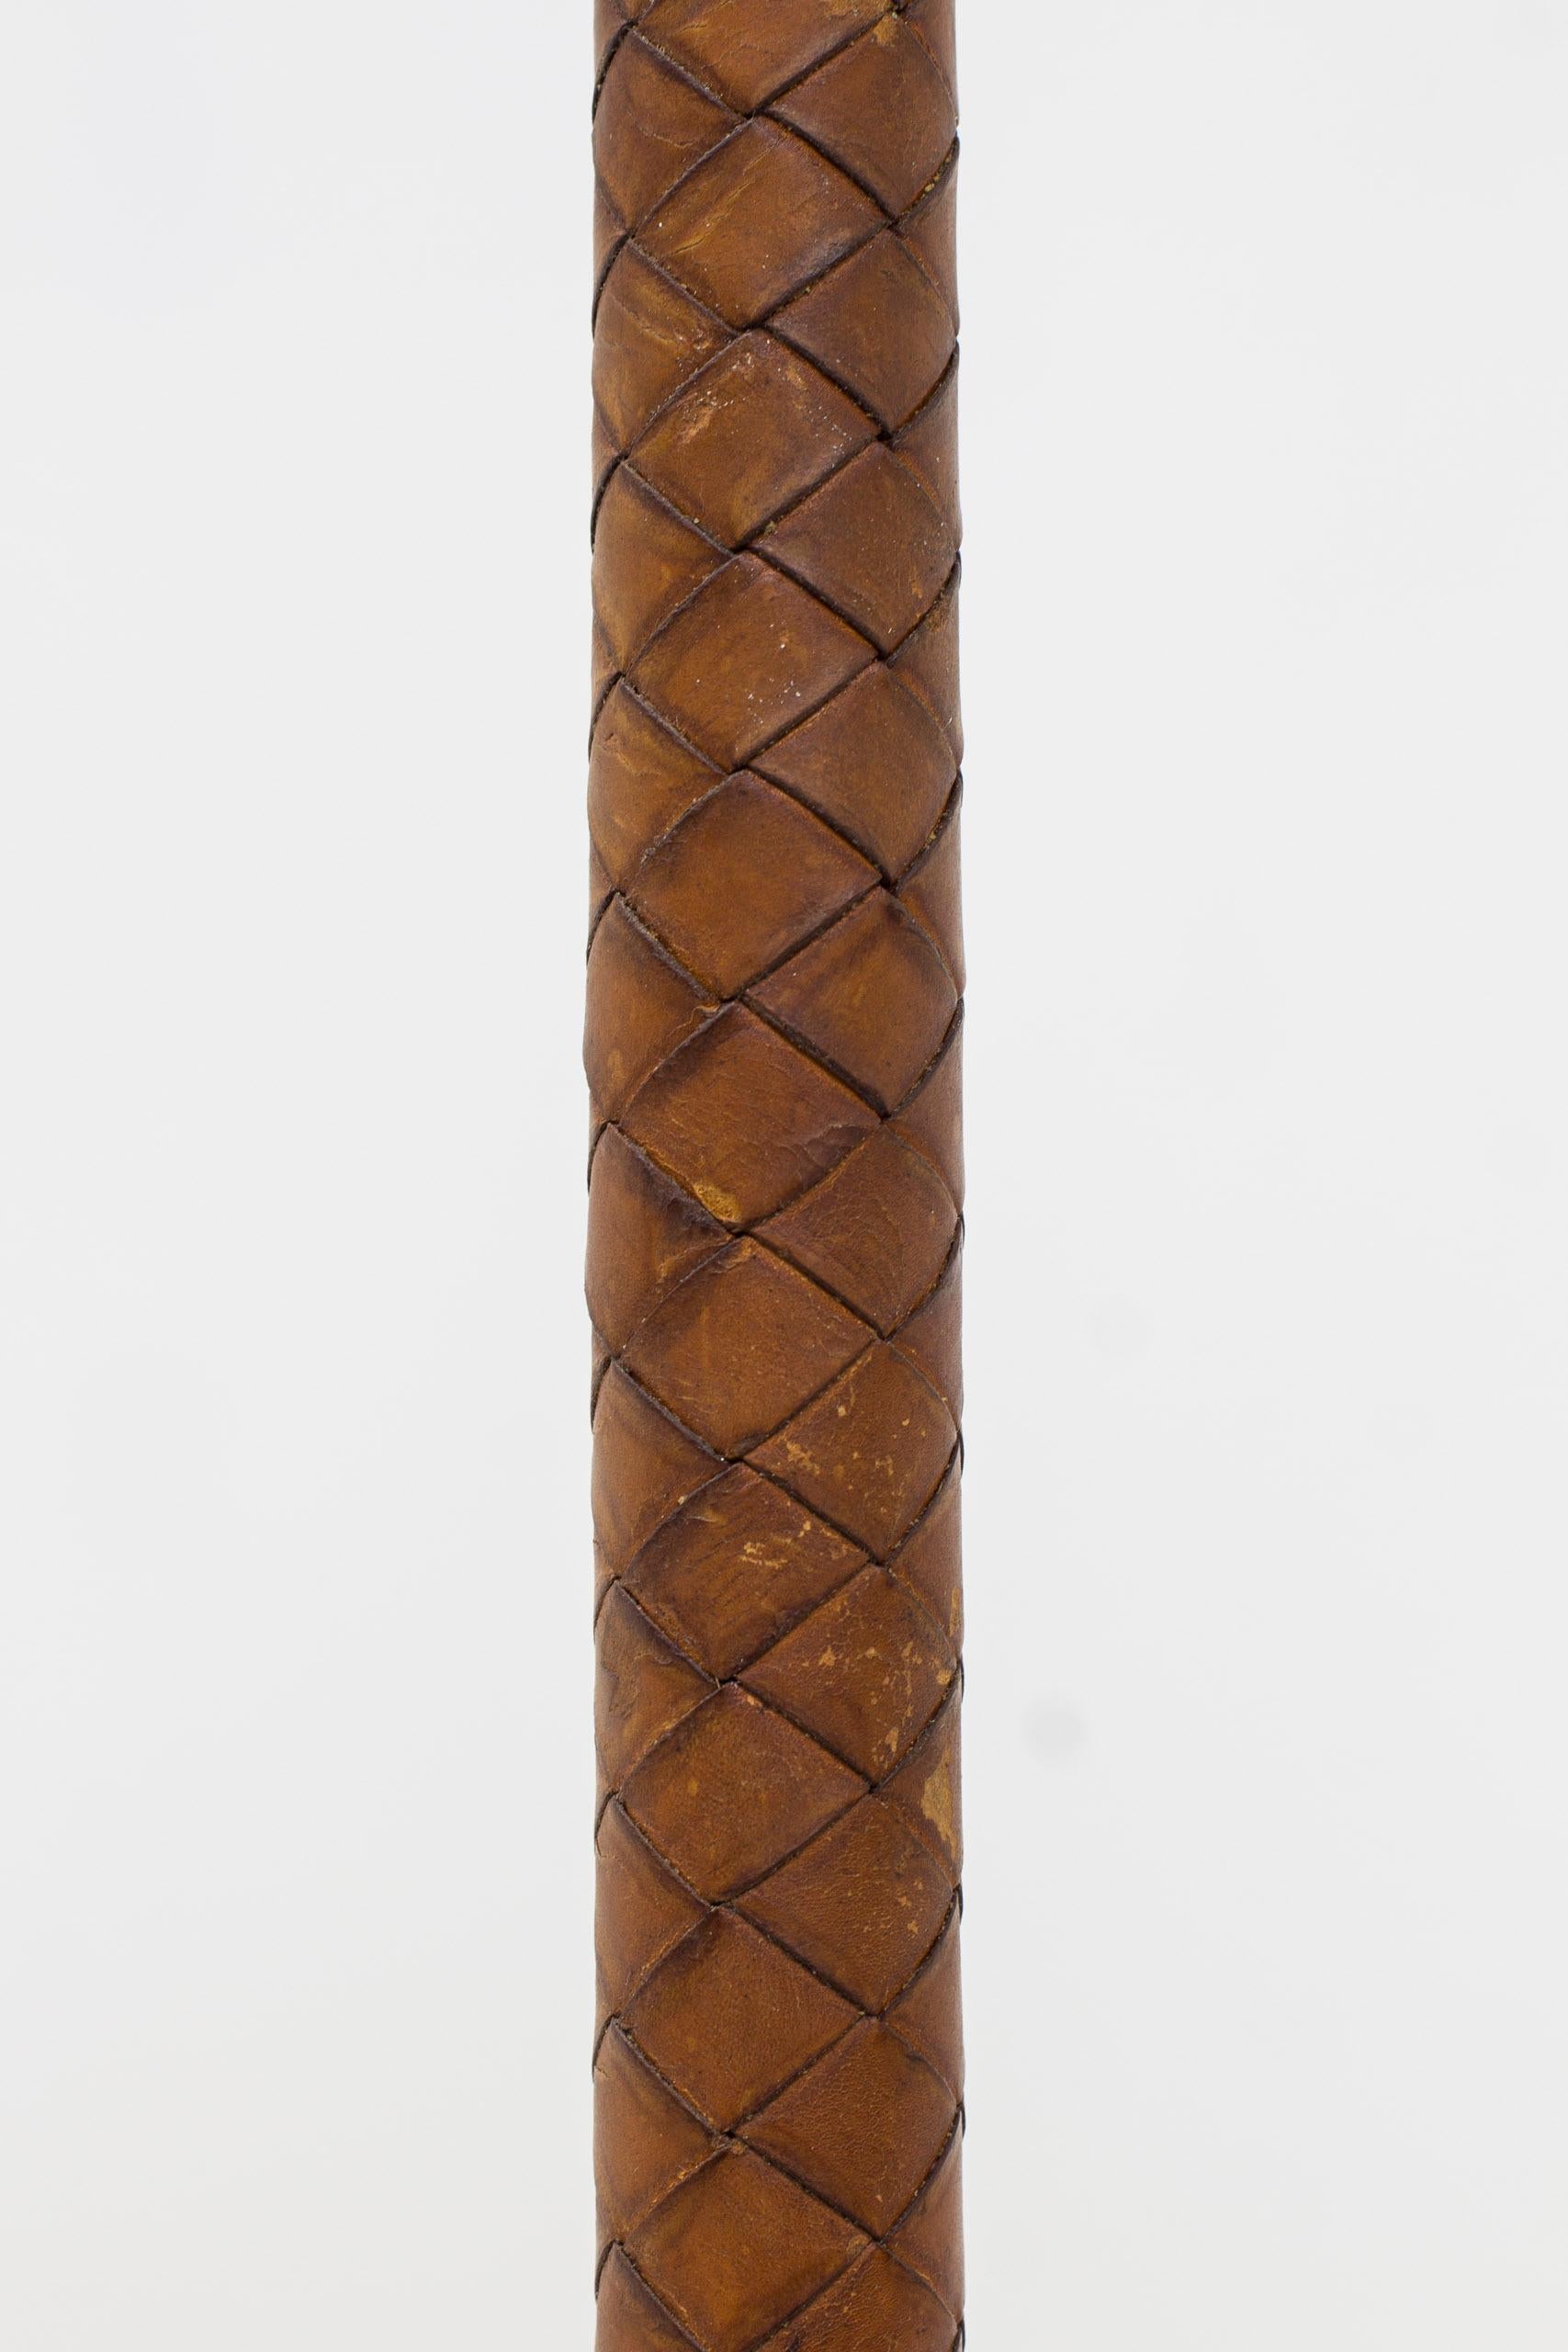 Swedish modern floor lamp with original braided cognac leather and brass, 1940s For Sale 7